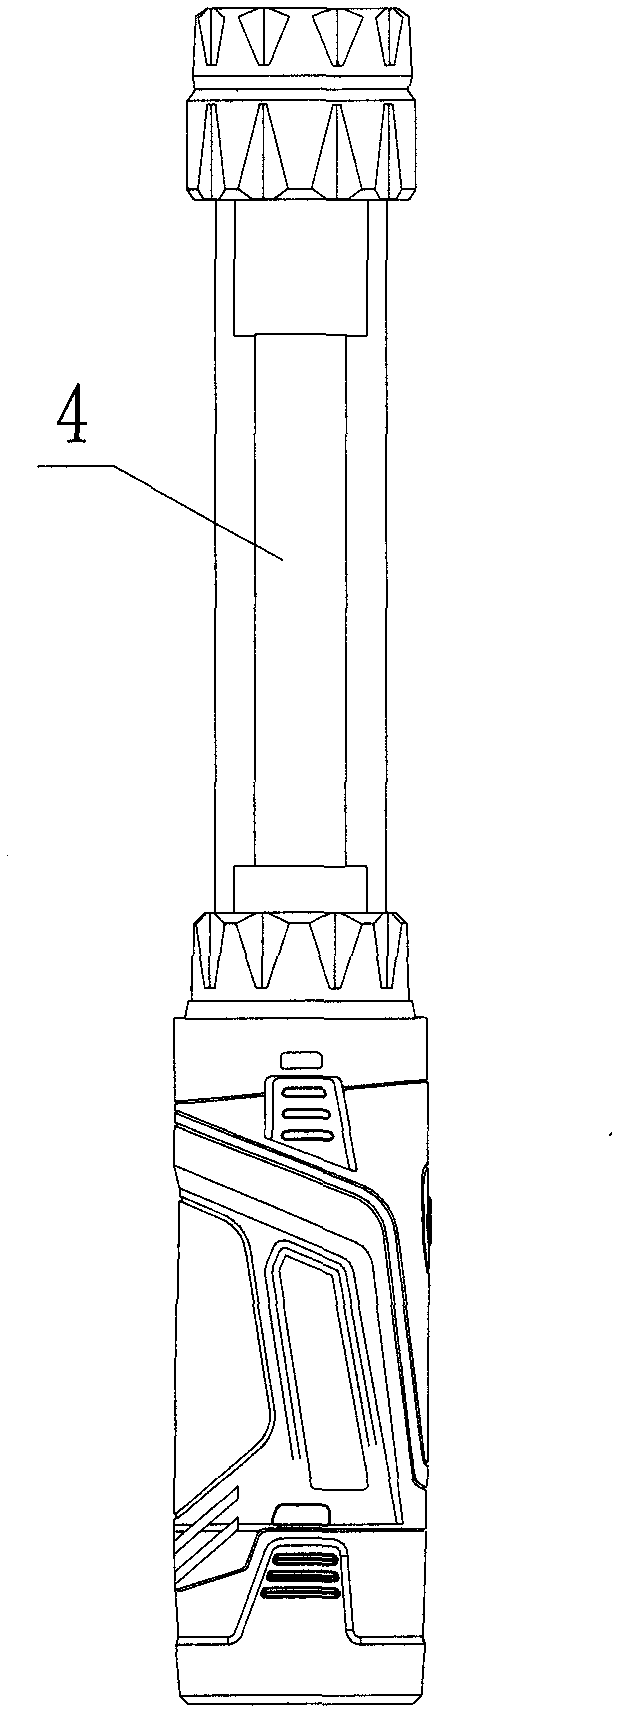 Structure capable of connecting with multiple types of functional heads on charging type flashlight